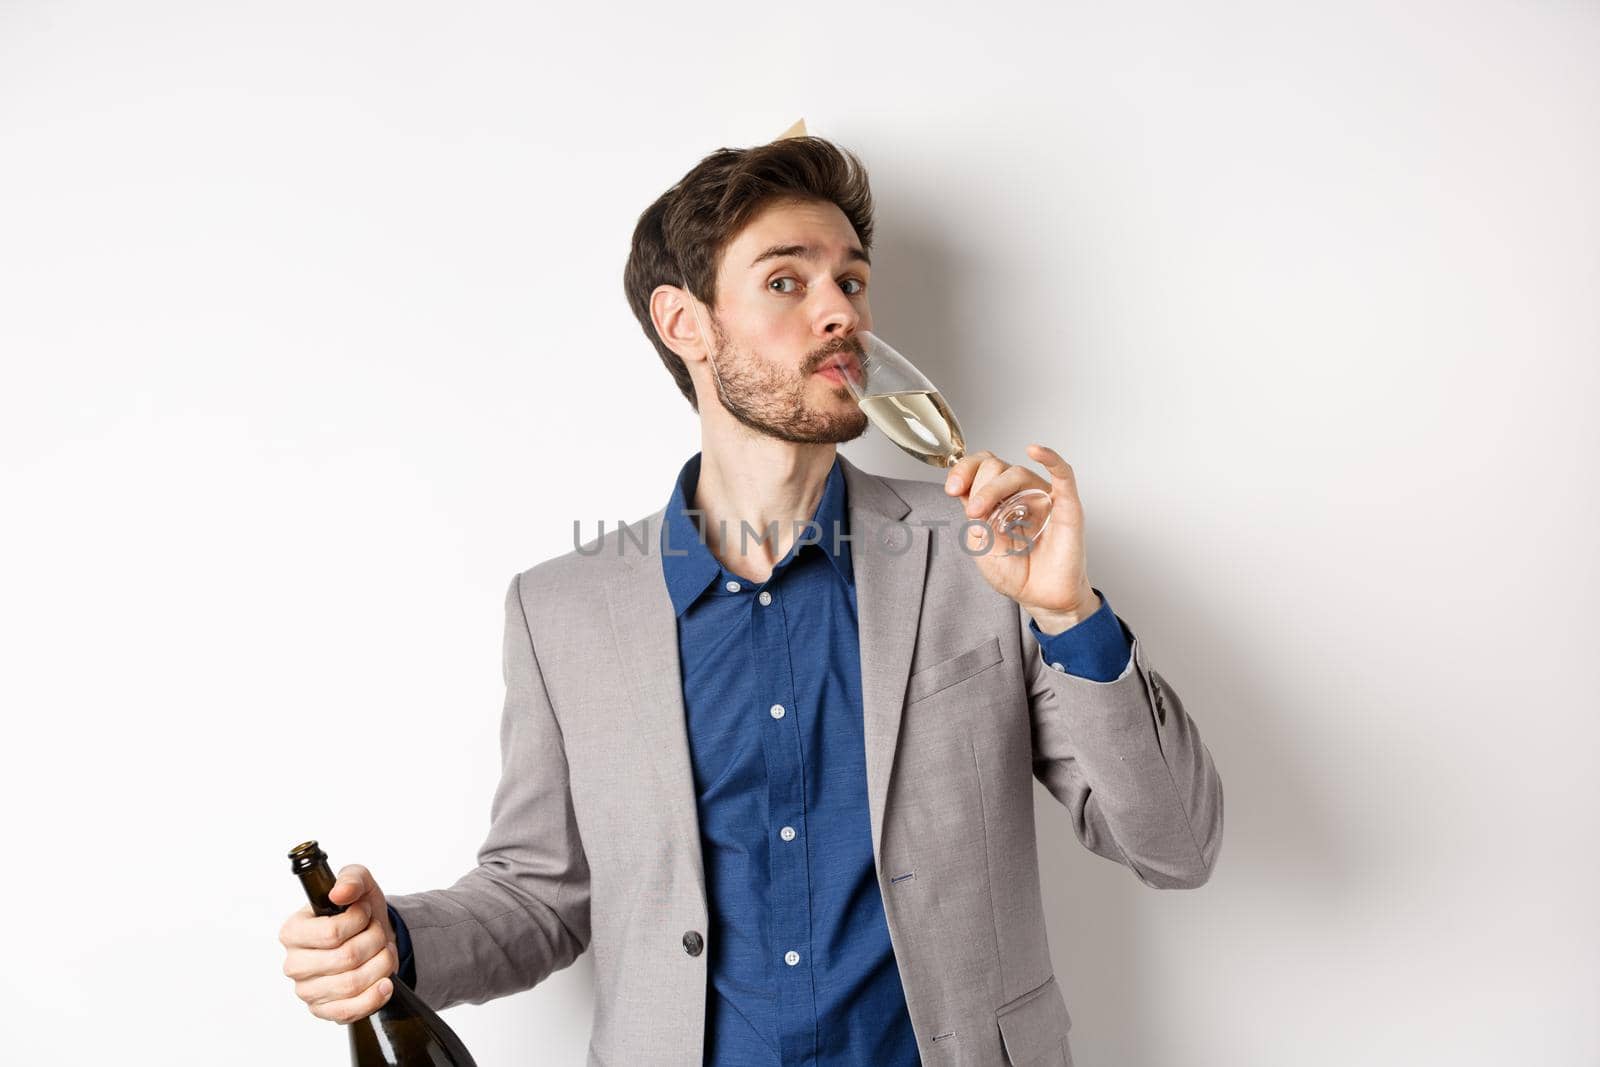 Celebration and holidays concept. Handsome bearded man in suit and birthday hat holding bottle, drinking glass of champagne, standing on white background.